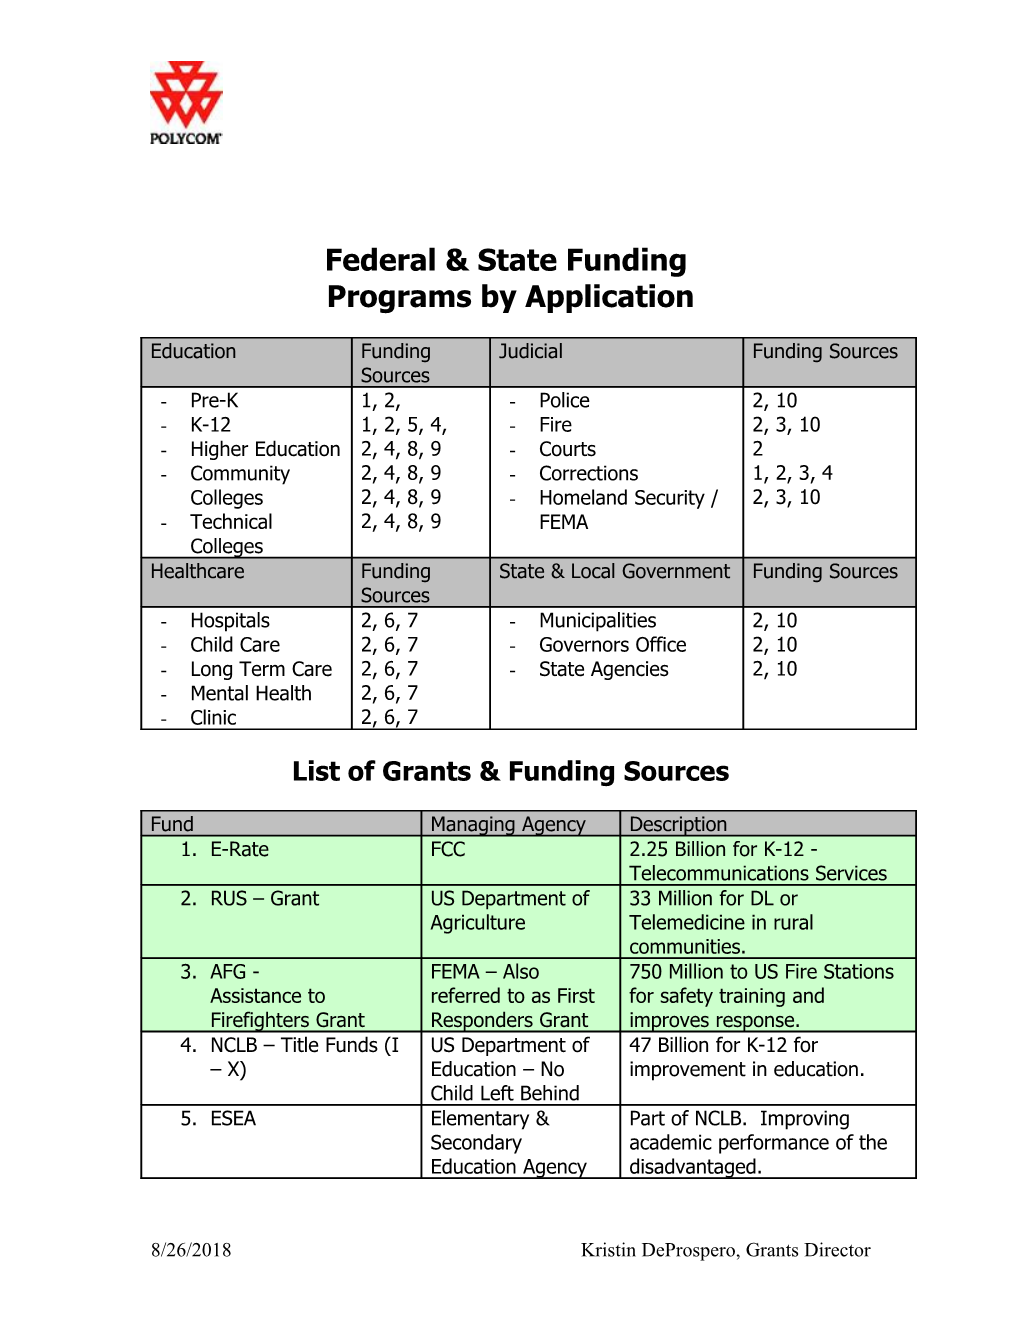 Federal & State Funding Programs by Application